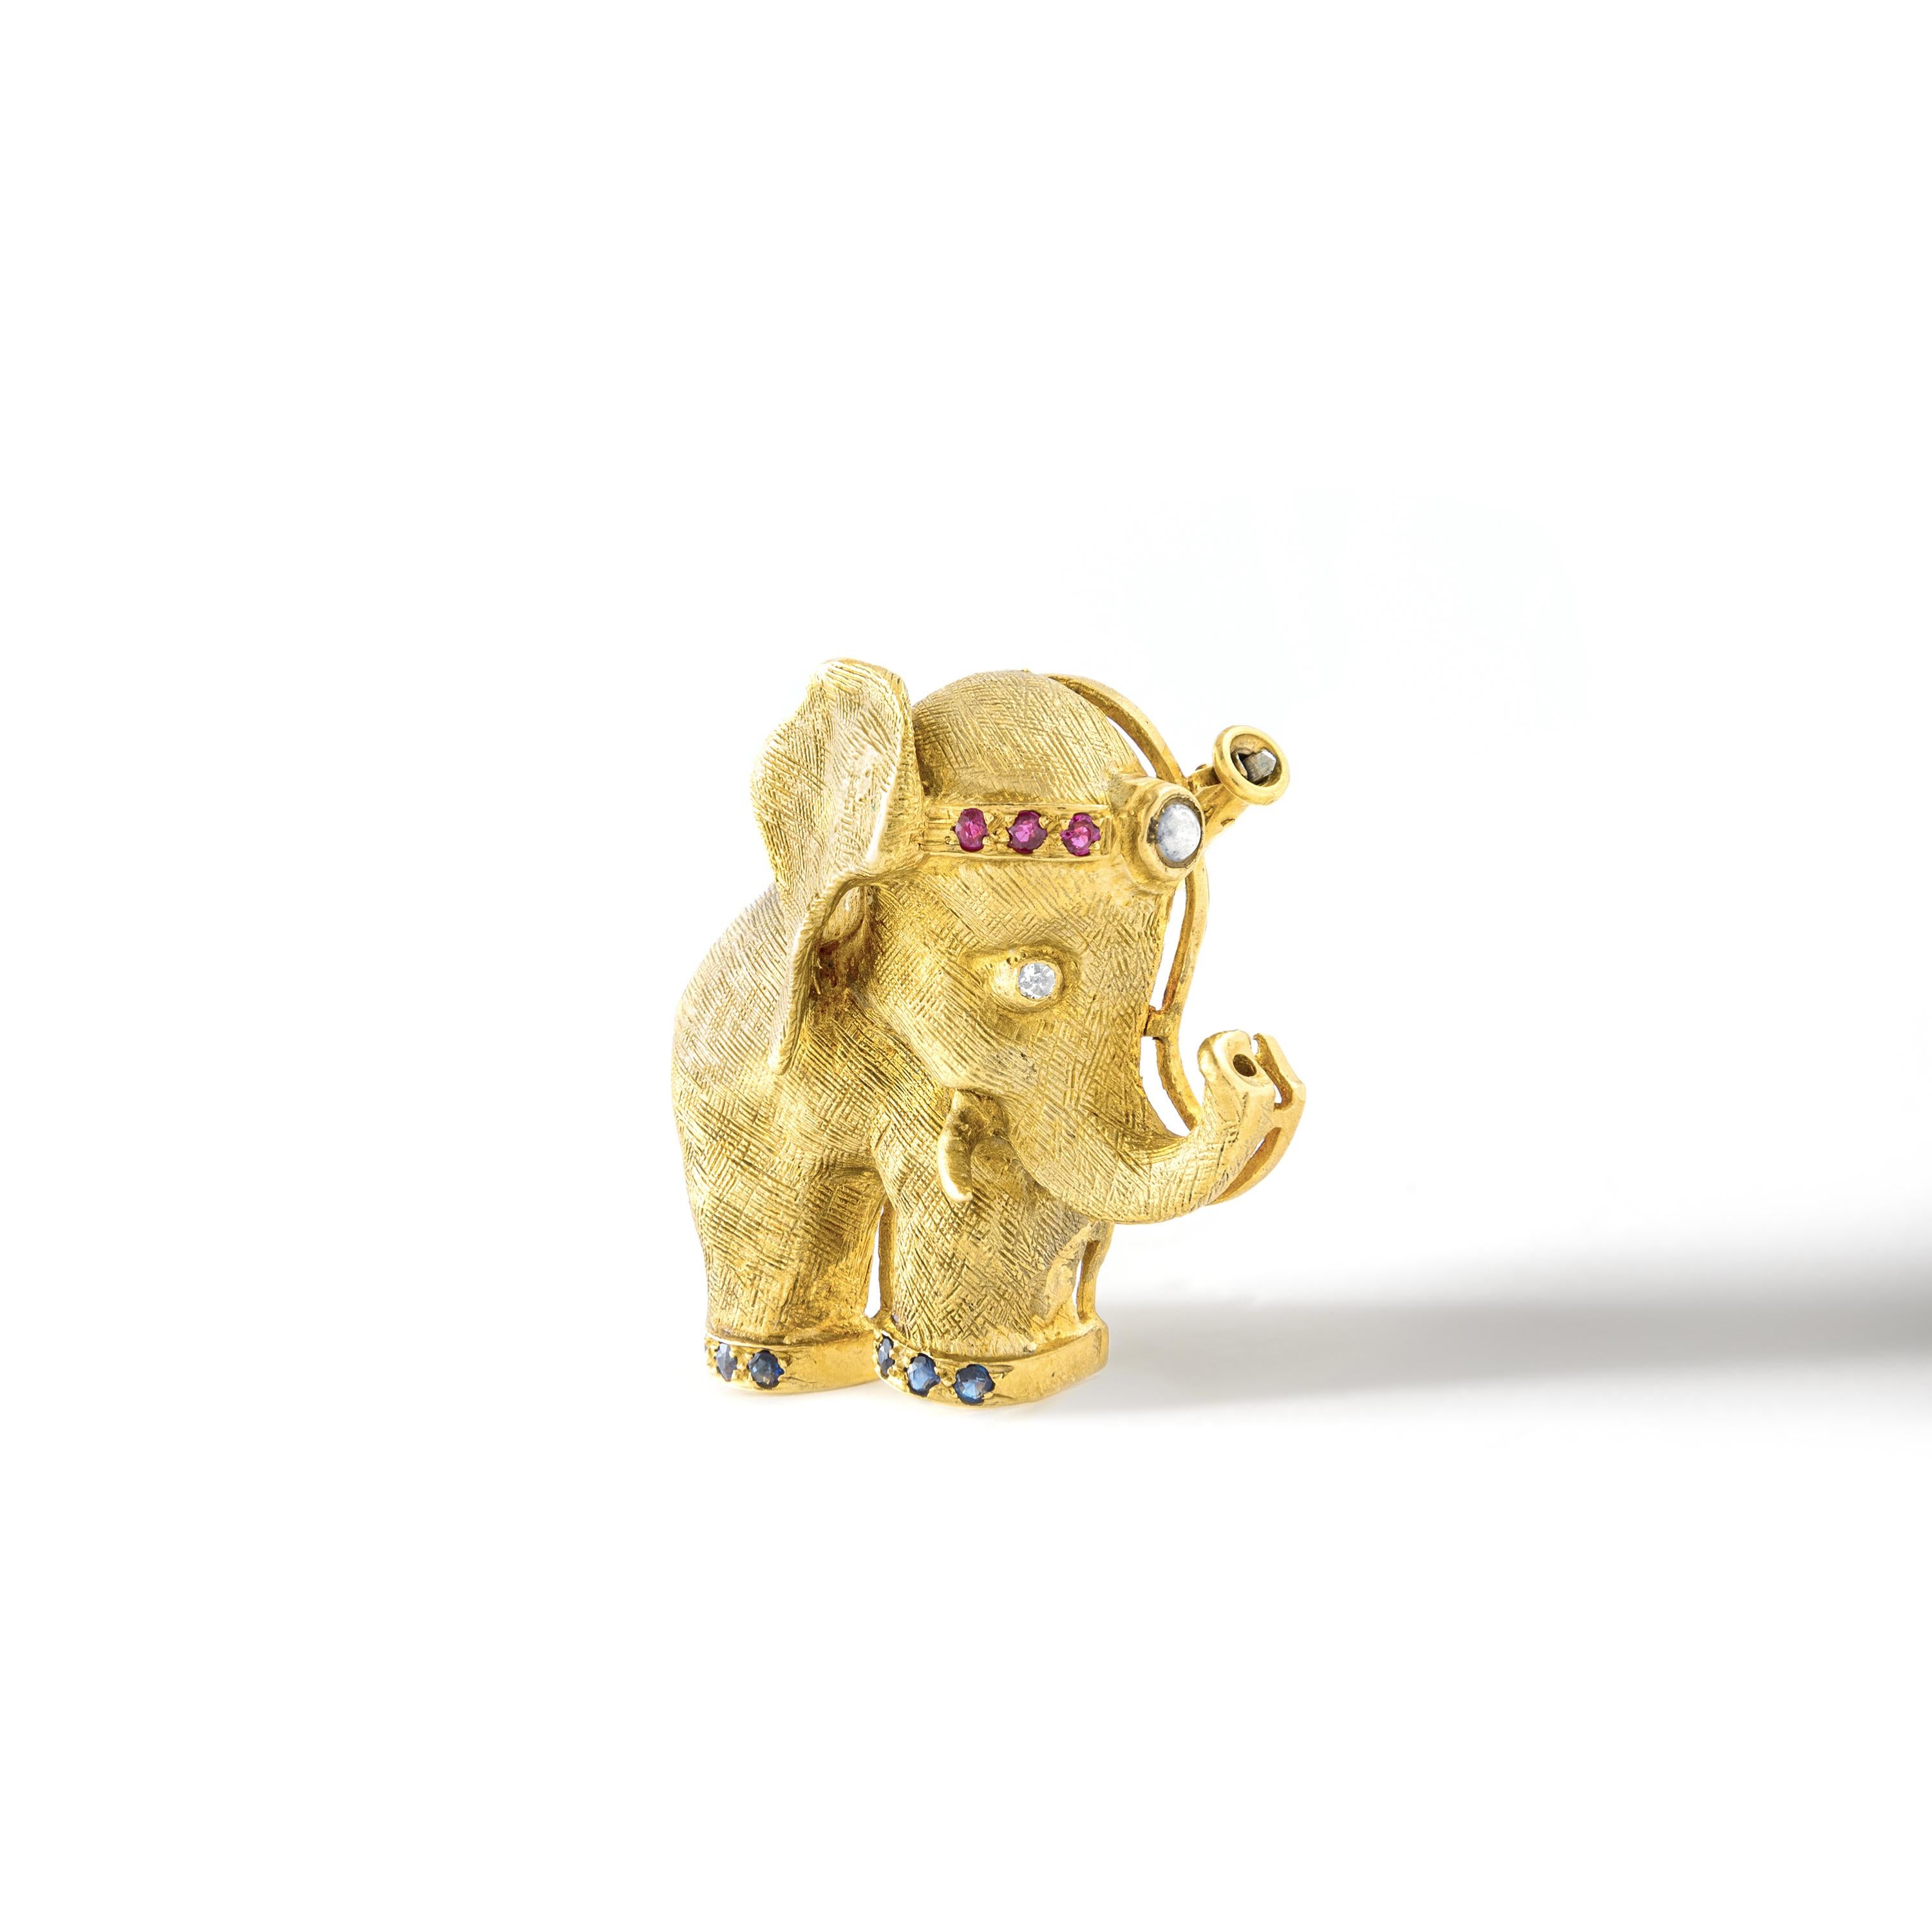 The exquisite 1960's French diamond ruby yellow gold 18K Elephant brooch clip. This stunning piece is not only a timeless fashion accessory, but it also carries powerful symbolism. The majestic elephant, rendered in luxurious yellow gold, is